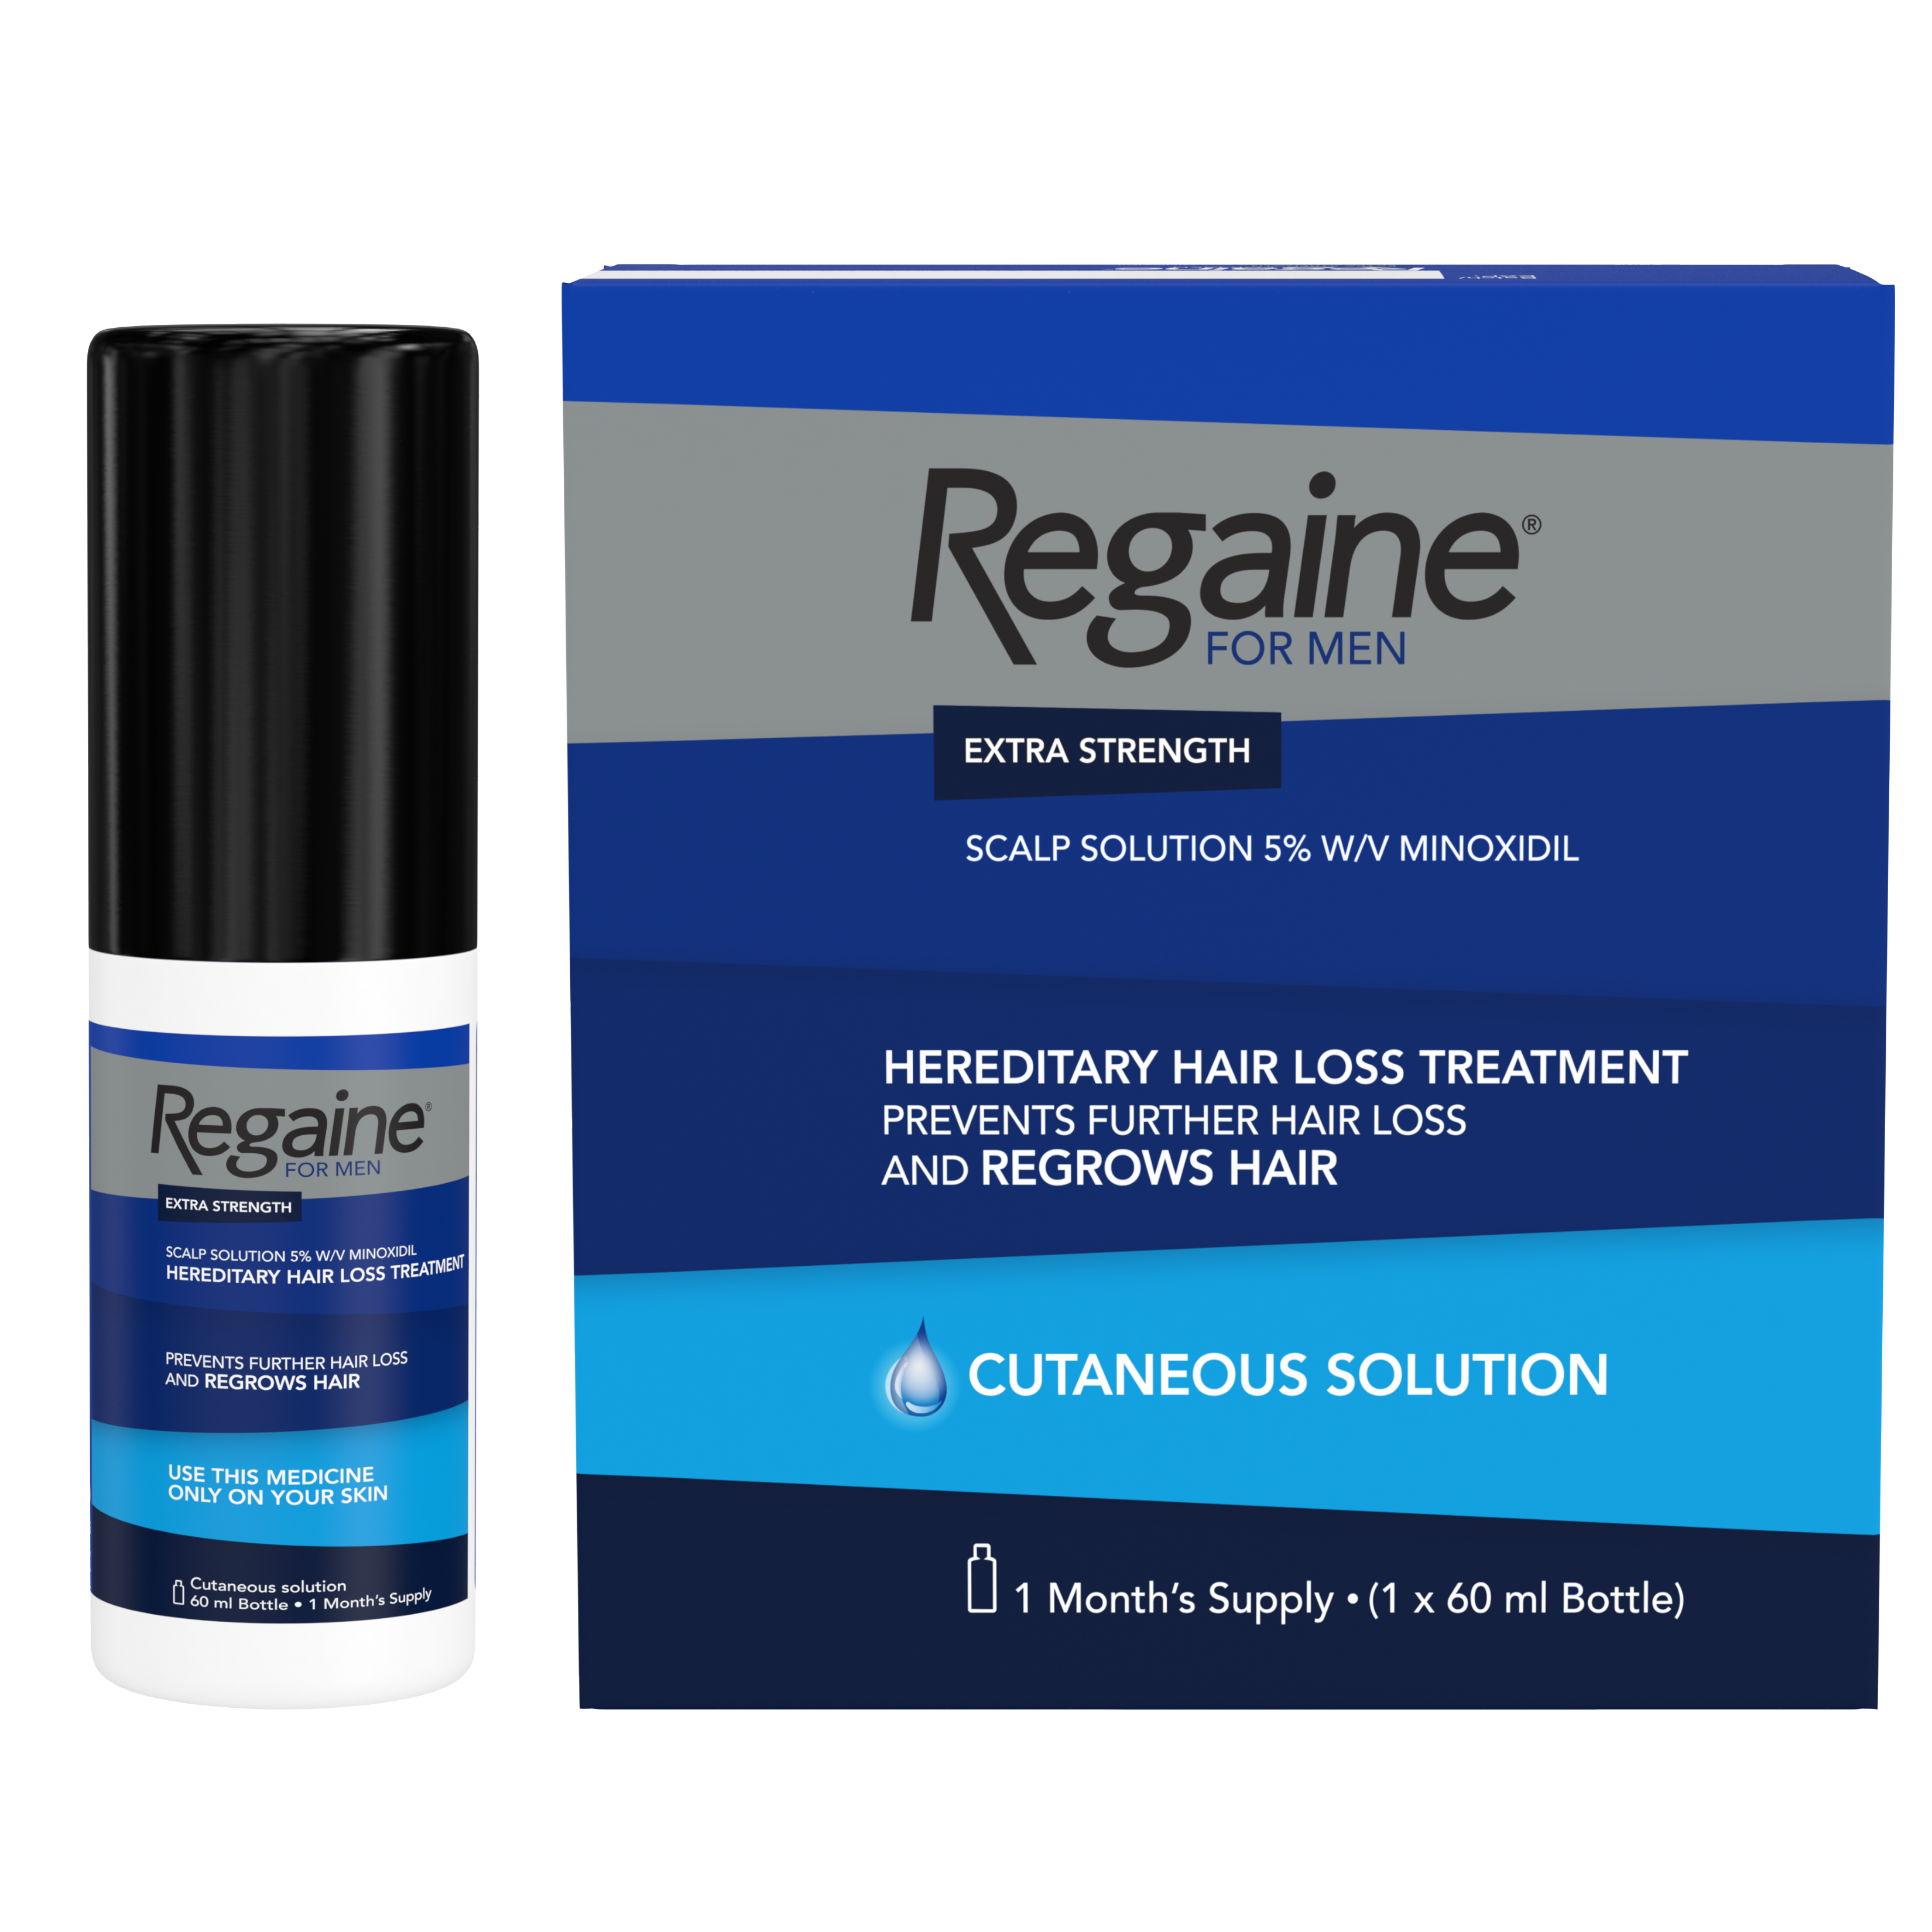 regaine for men extra strength product